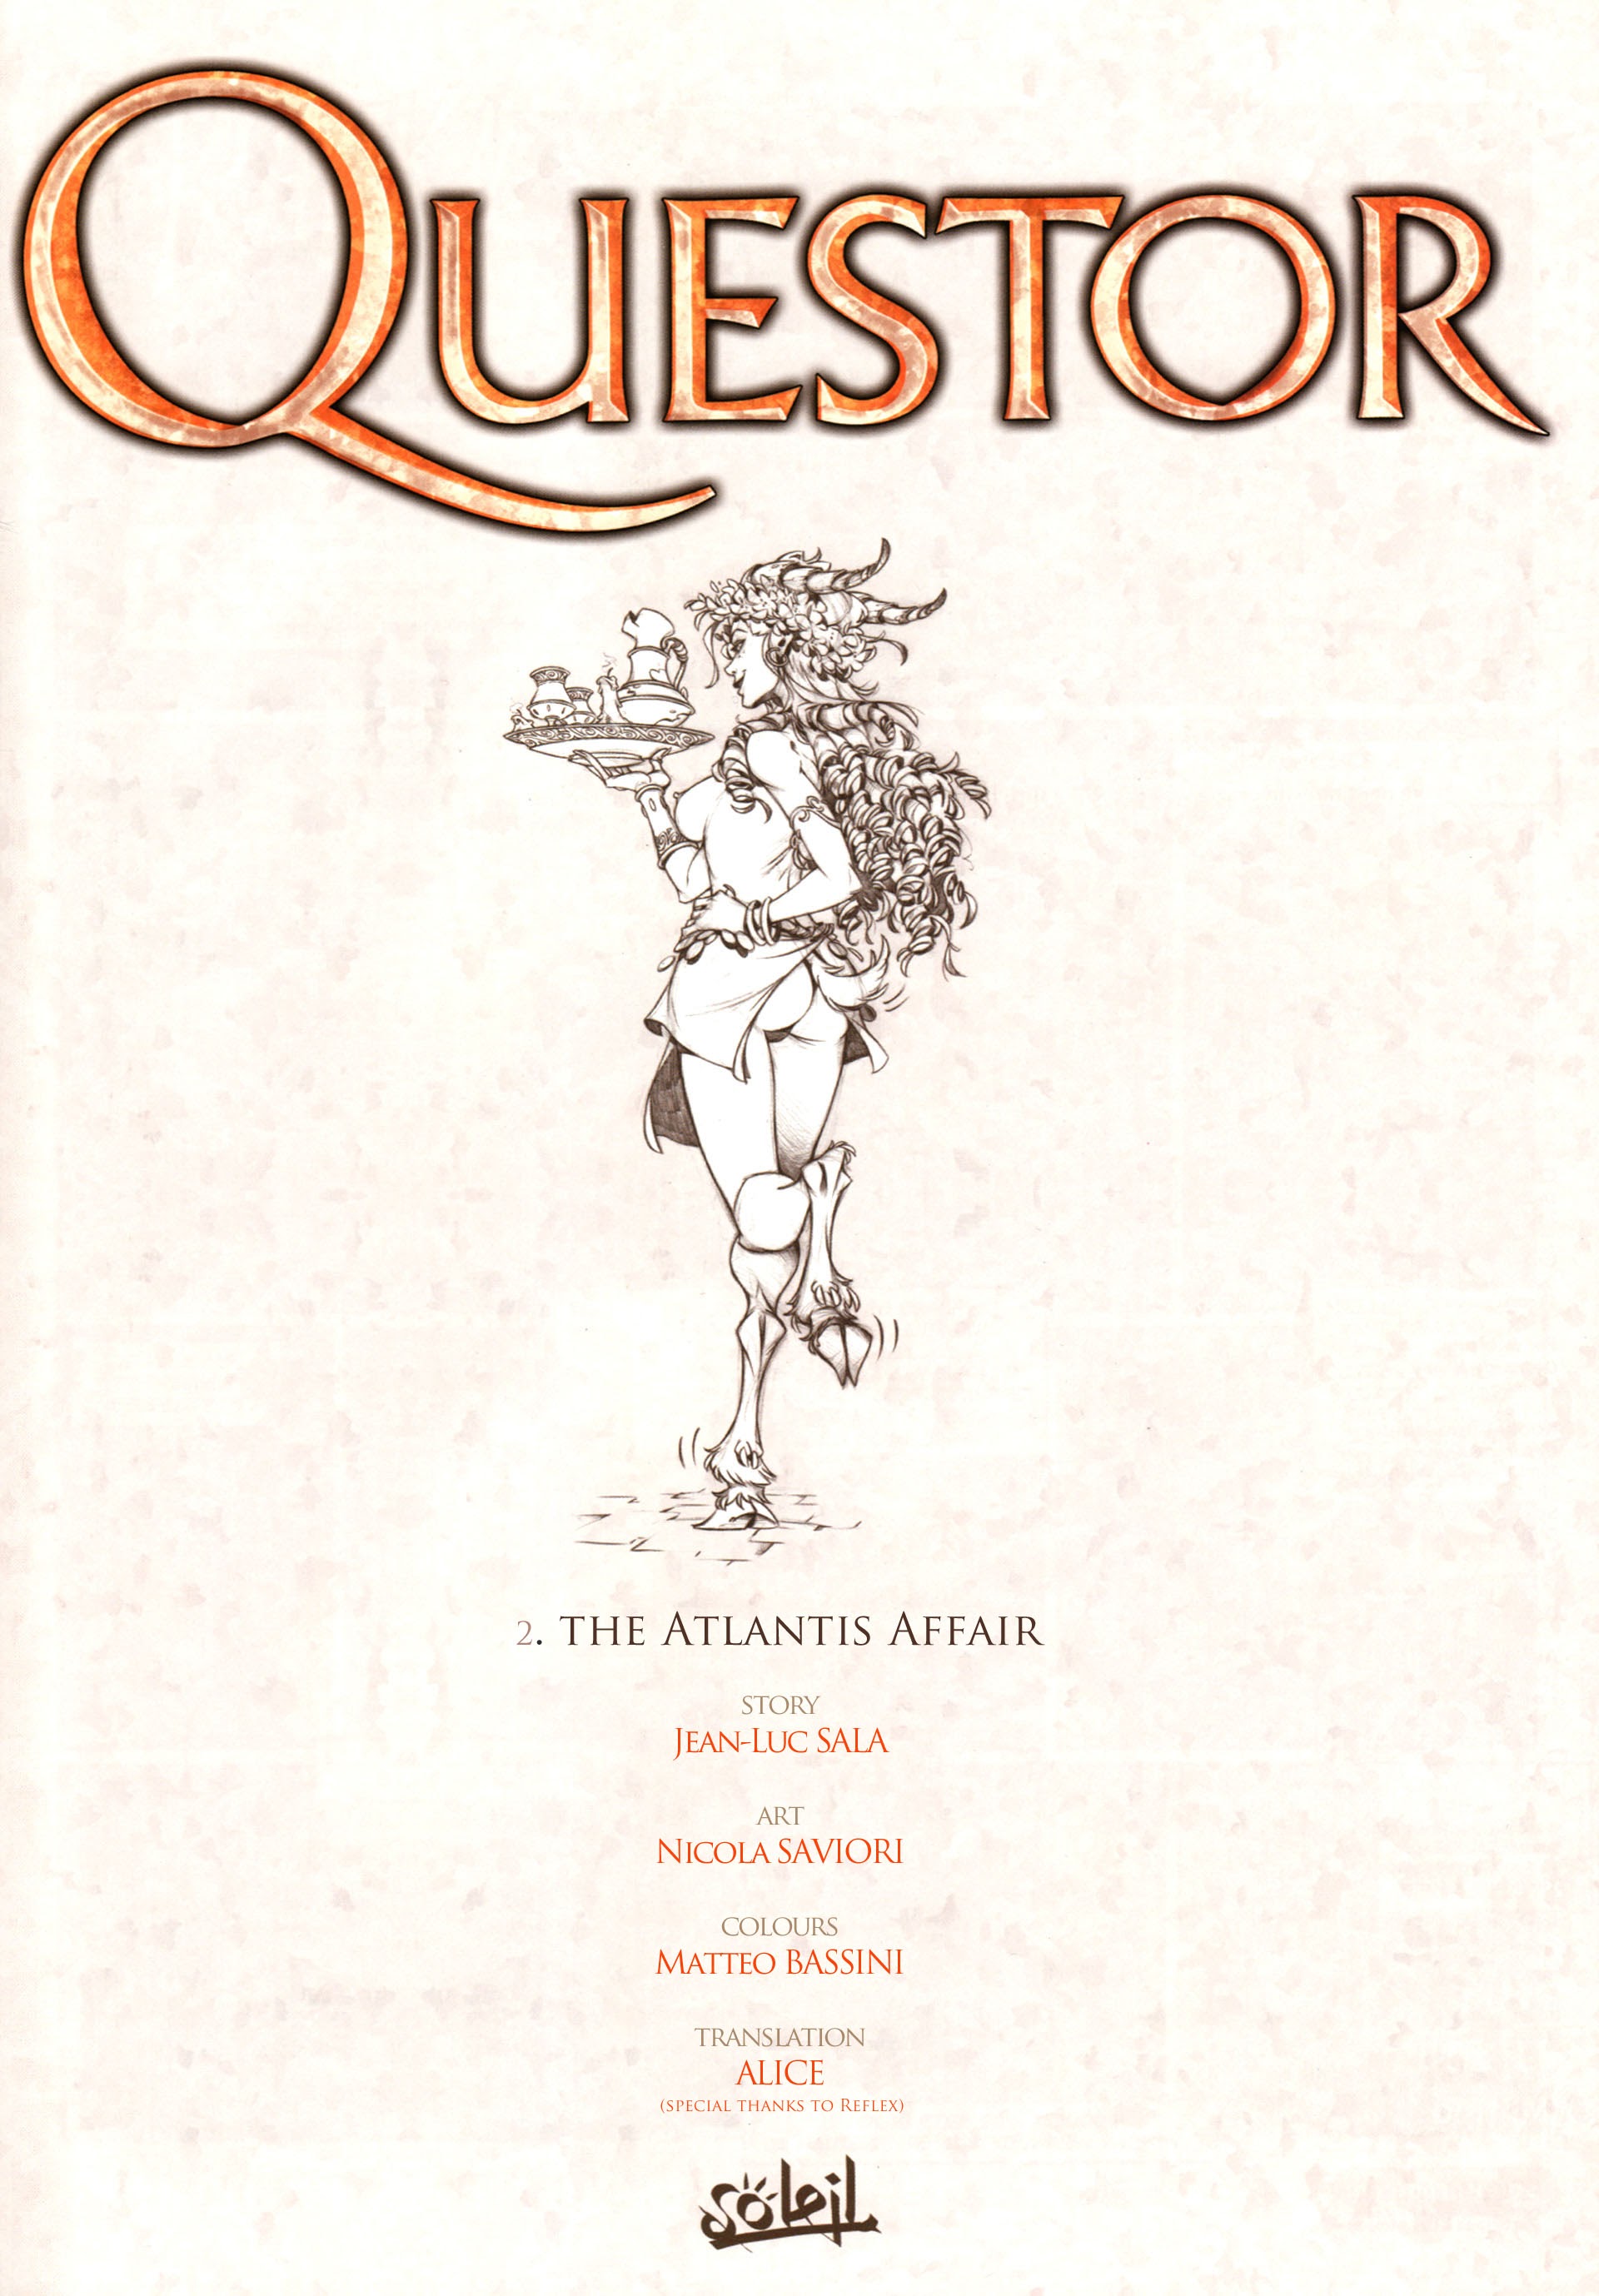 Read online Questor comic -  Issue #2 - 3